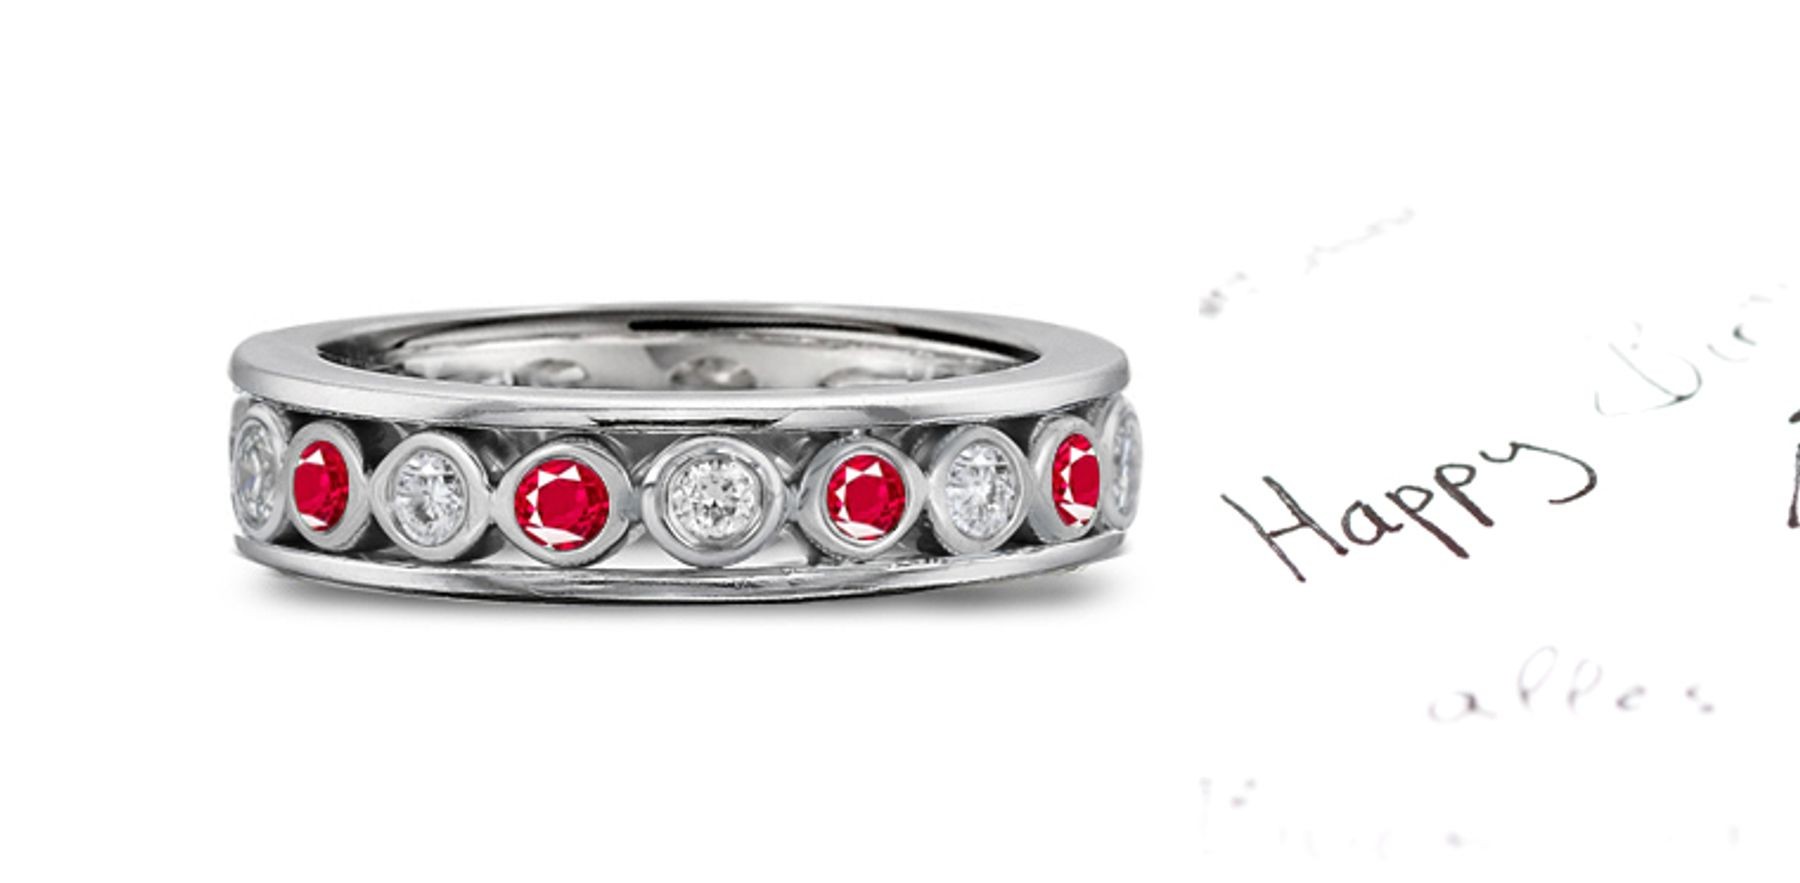 Bezel Set Diamond & Ruby Band Set Between Two Raised Platinum Bands in Ring Size 3 to 8